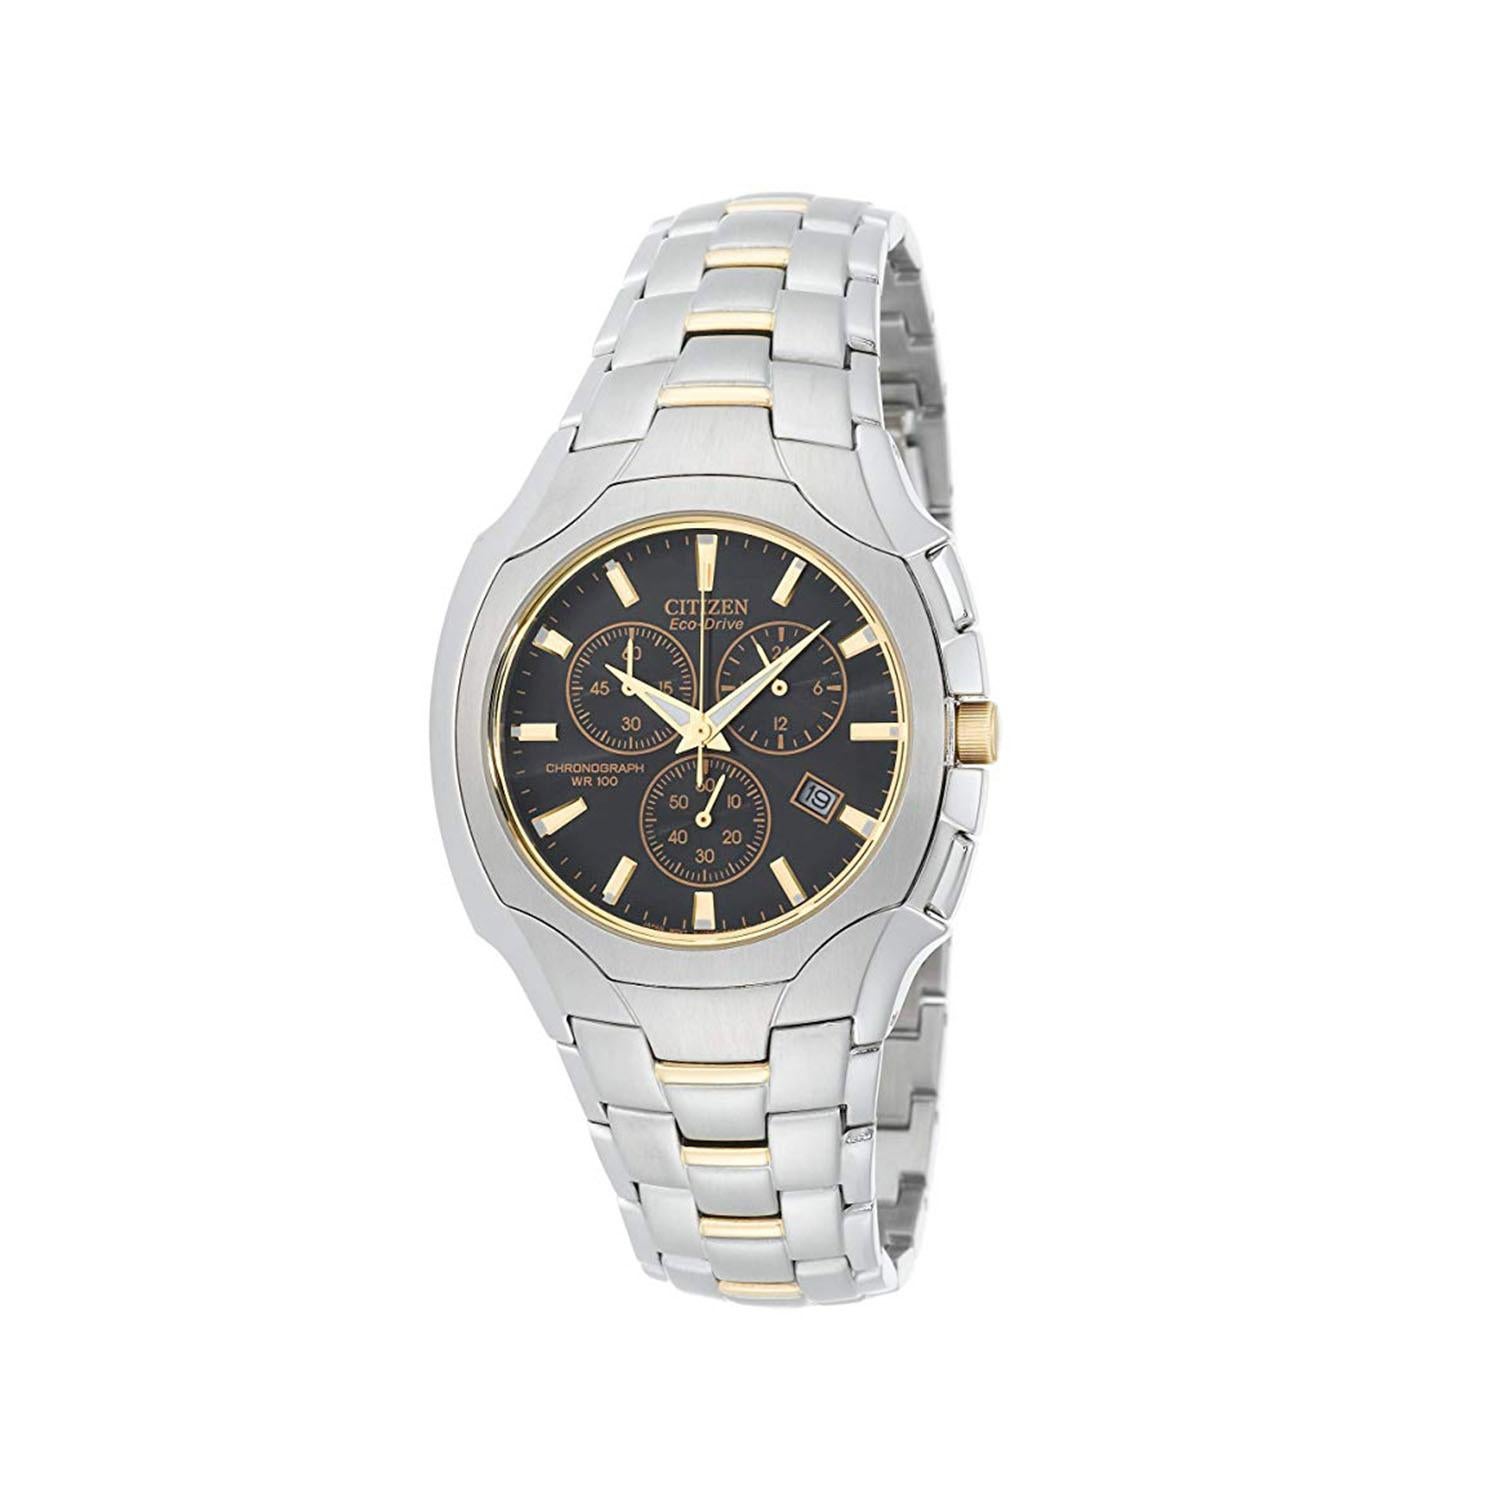 This New Without Tags Citizen Eco-drive AT0884-59E is a beautiful men's timepiece that is powered by quartz: solar powered movement which is cased in a stainless steel case. It has a round shape face, chronograph, chronograph hand, date, small